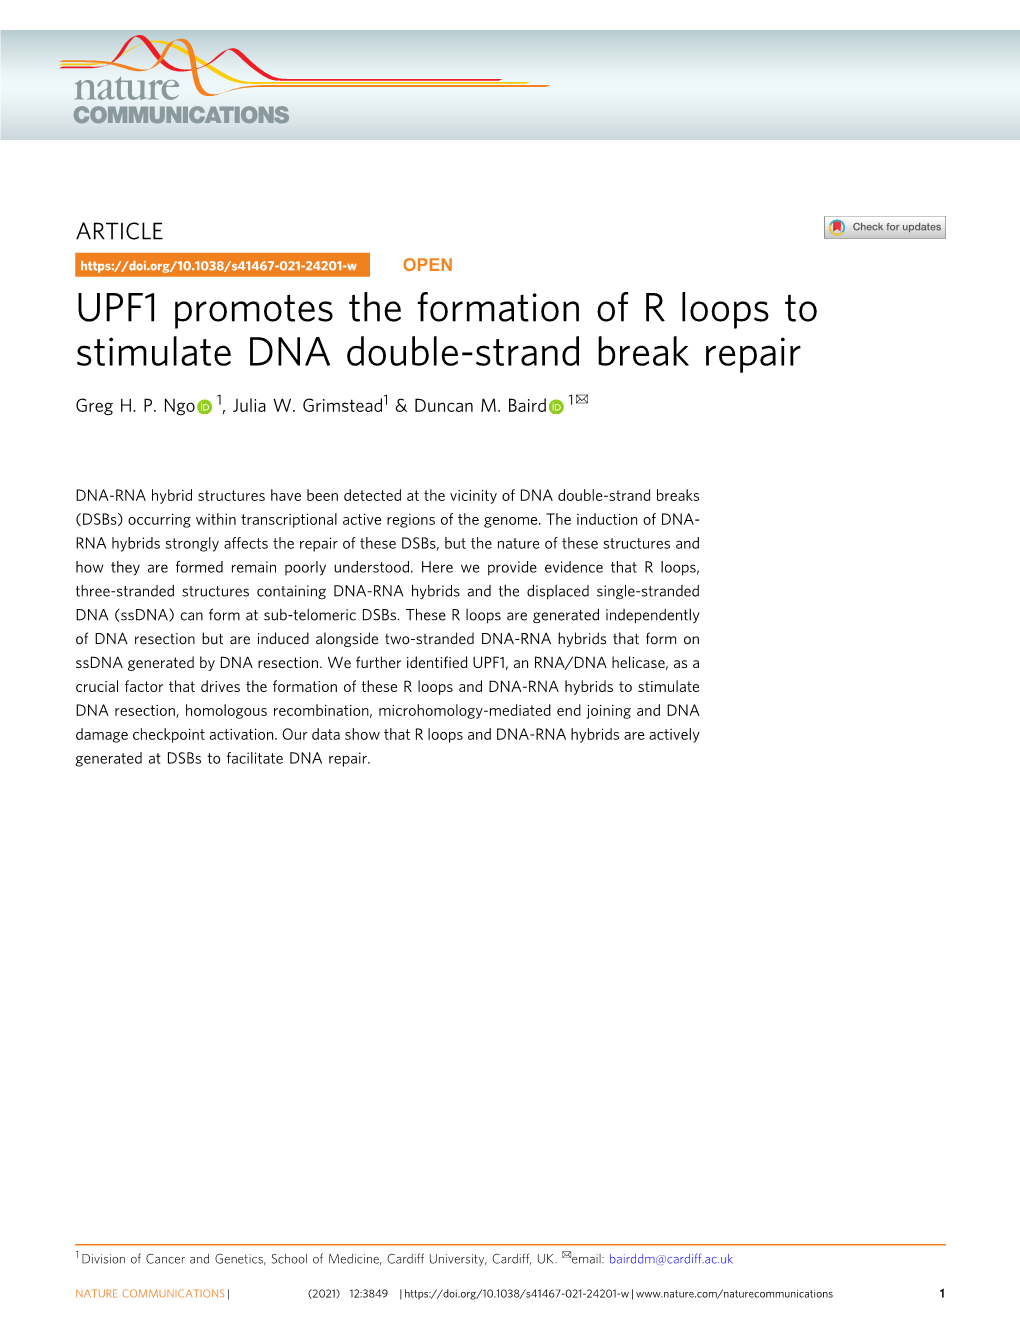 UPF1 Promotes the Formation of R Loops to Stimulate DNA Double-Strand Break Repair ✉ Greg H